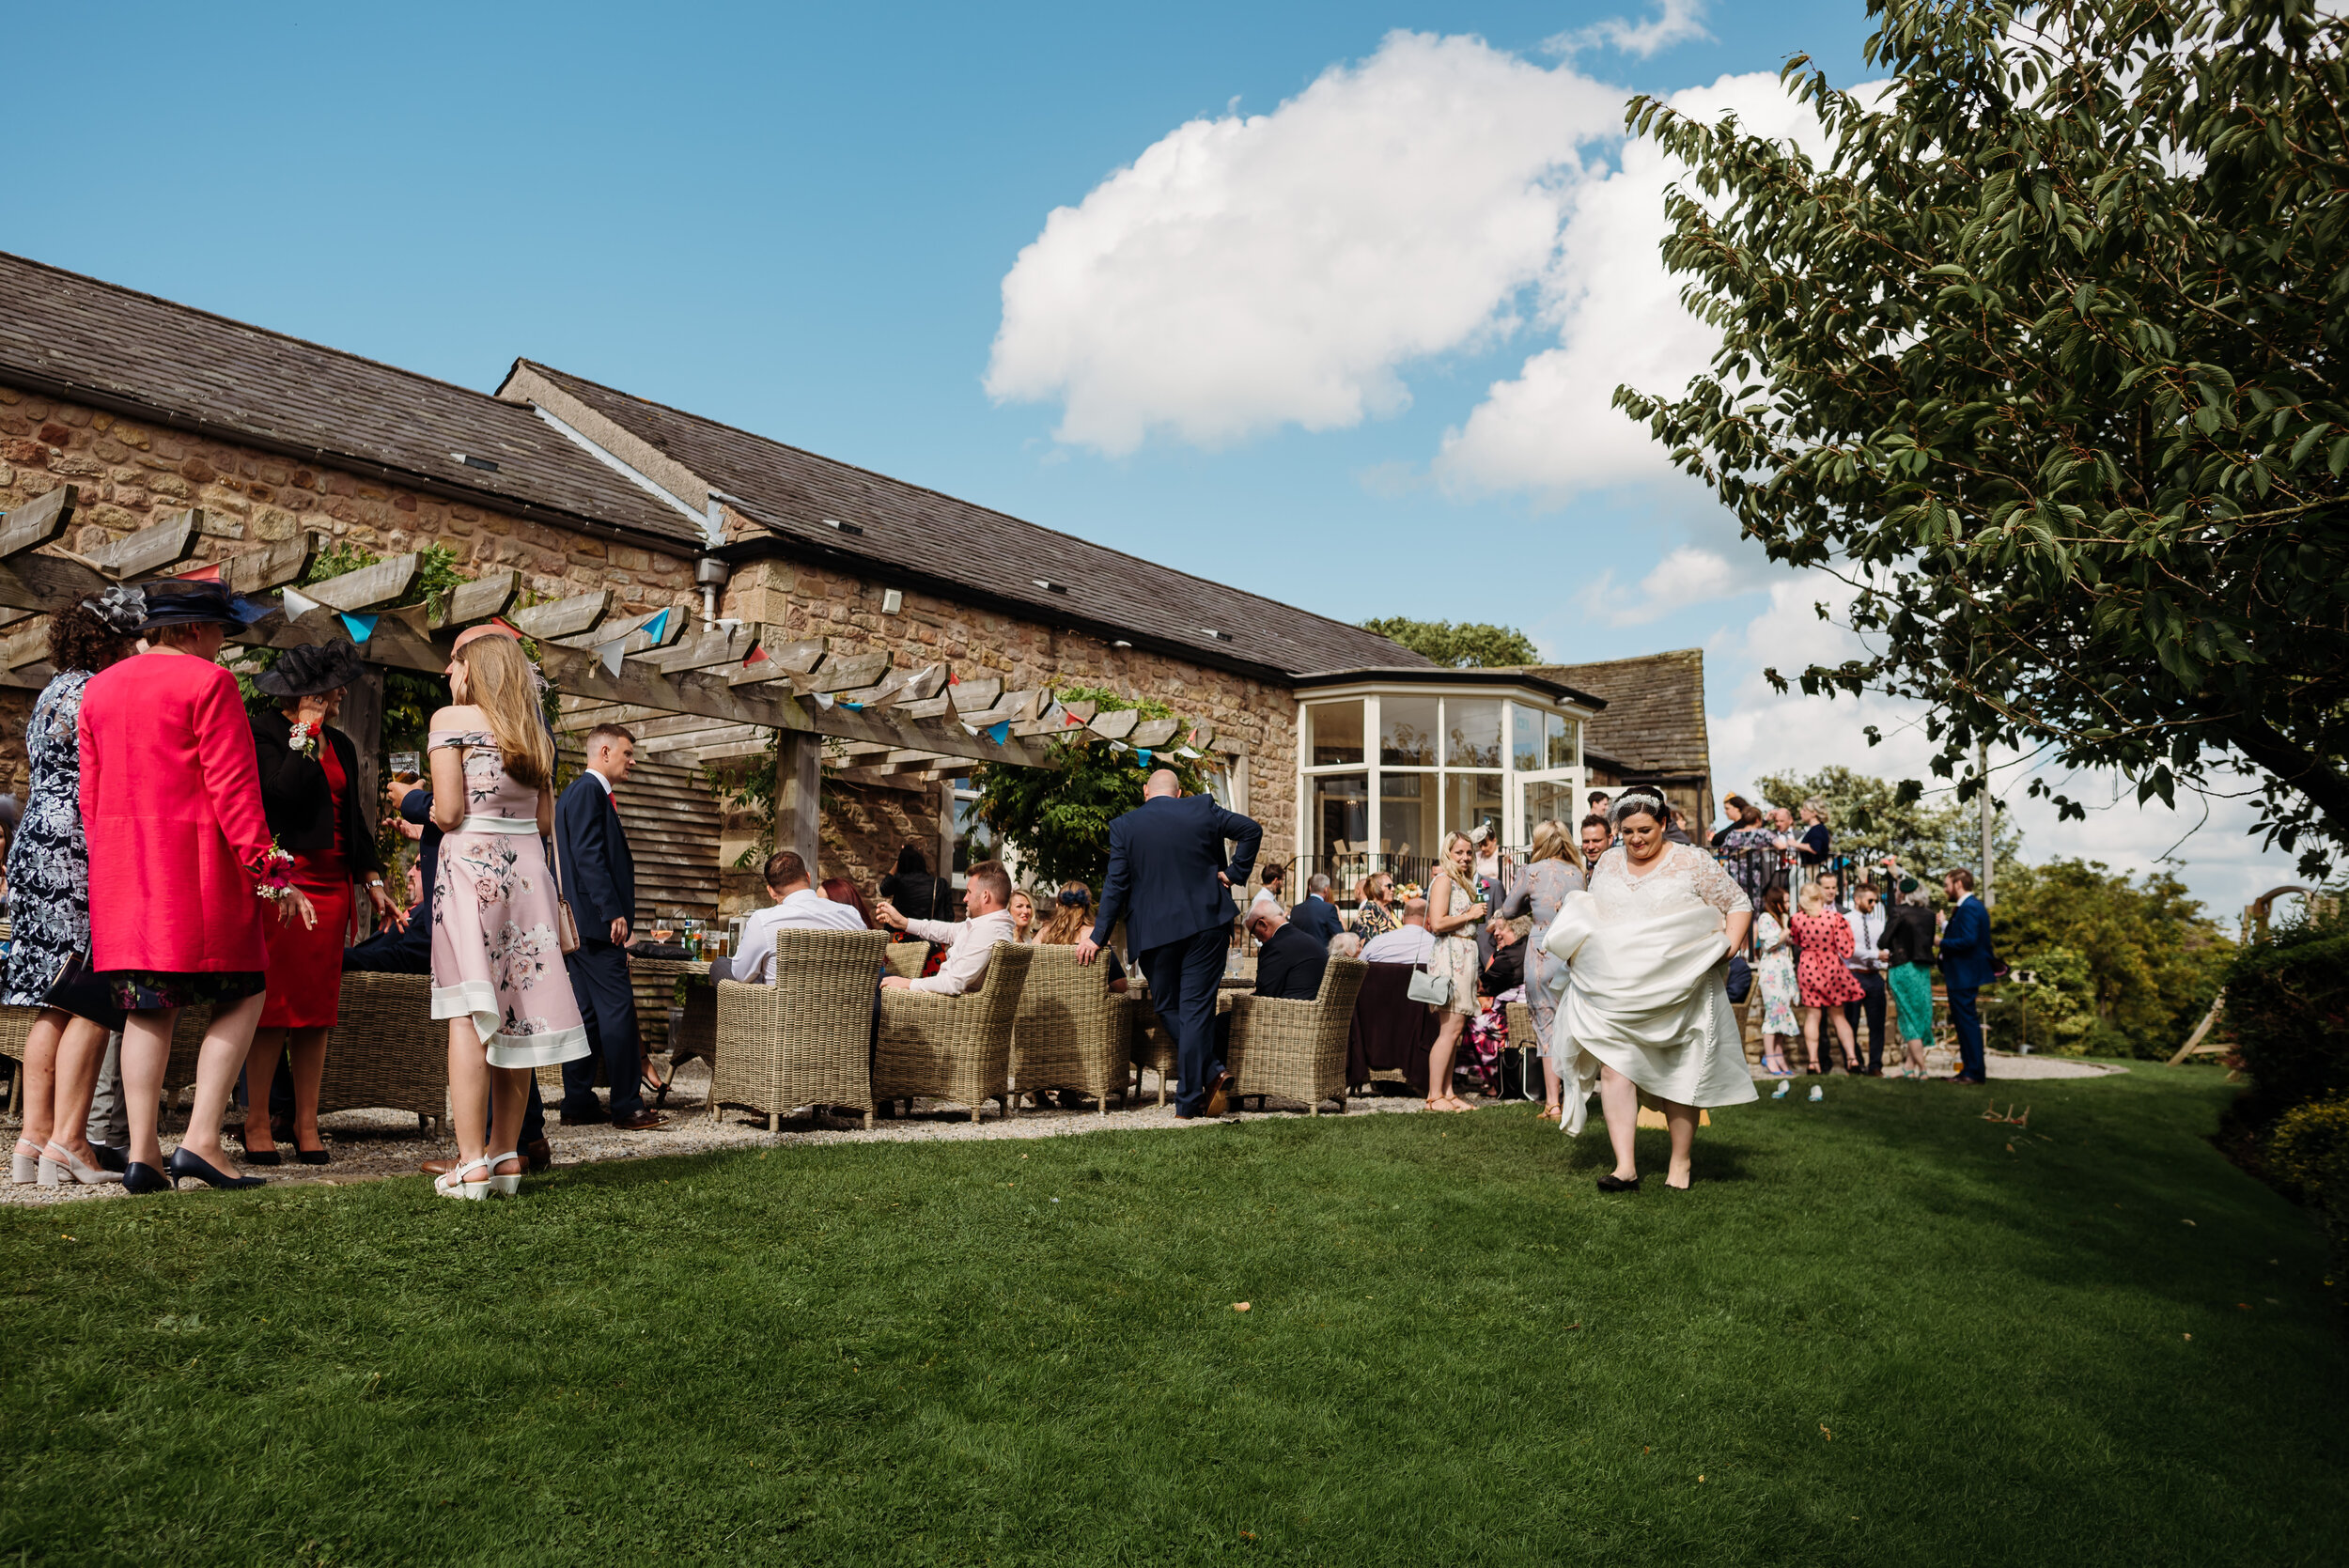 Wedding guests in the garden enjoying the sun at the Shireburn Arms